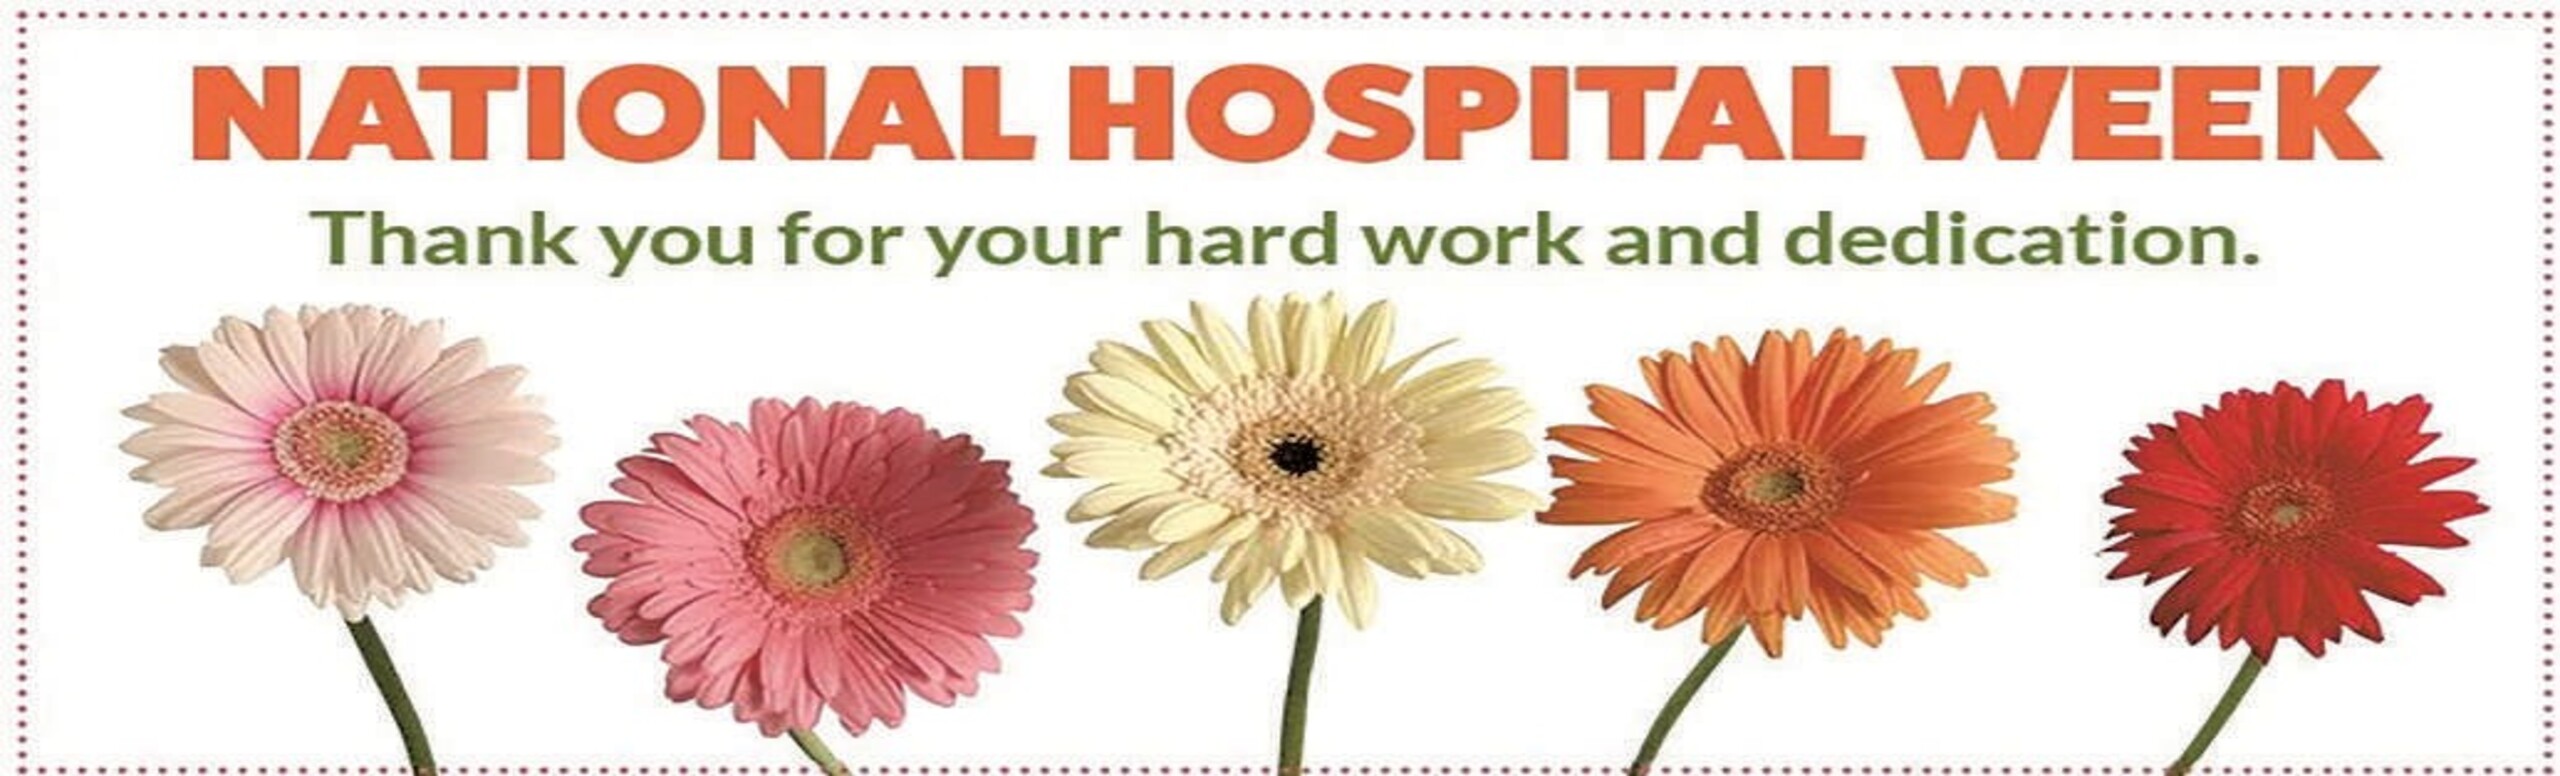 National Hospital Week 
Thank you for your hard work and dedication.